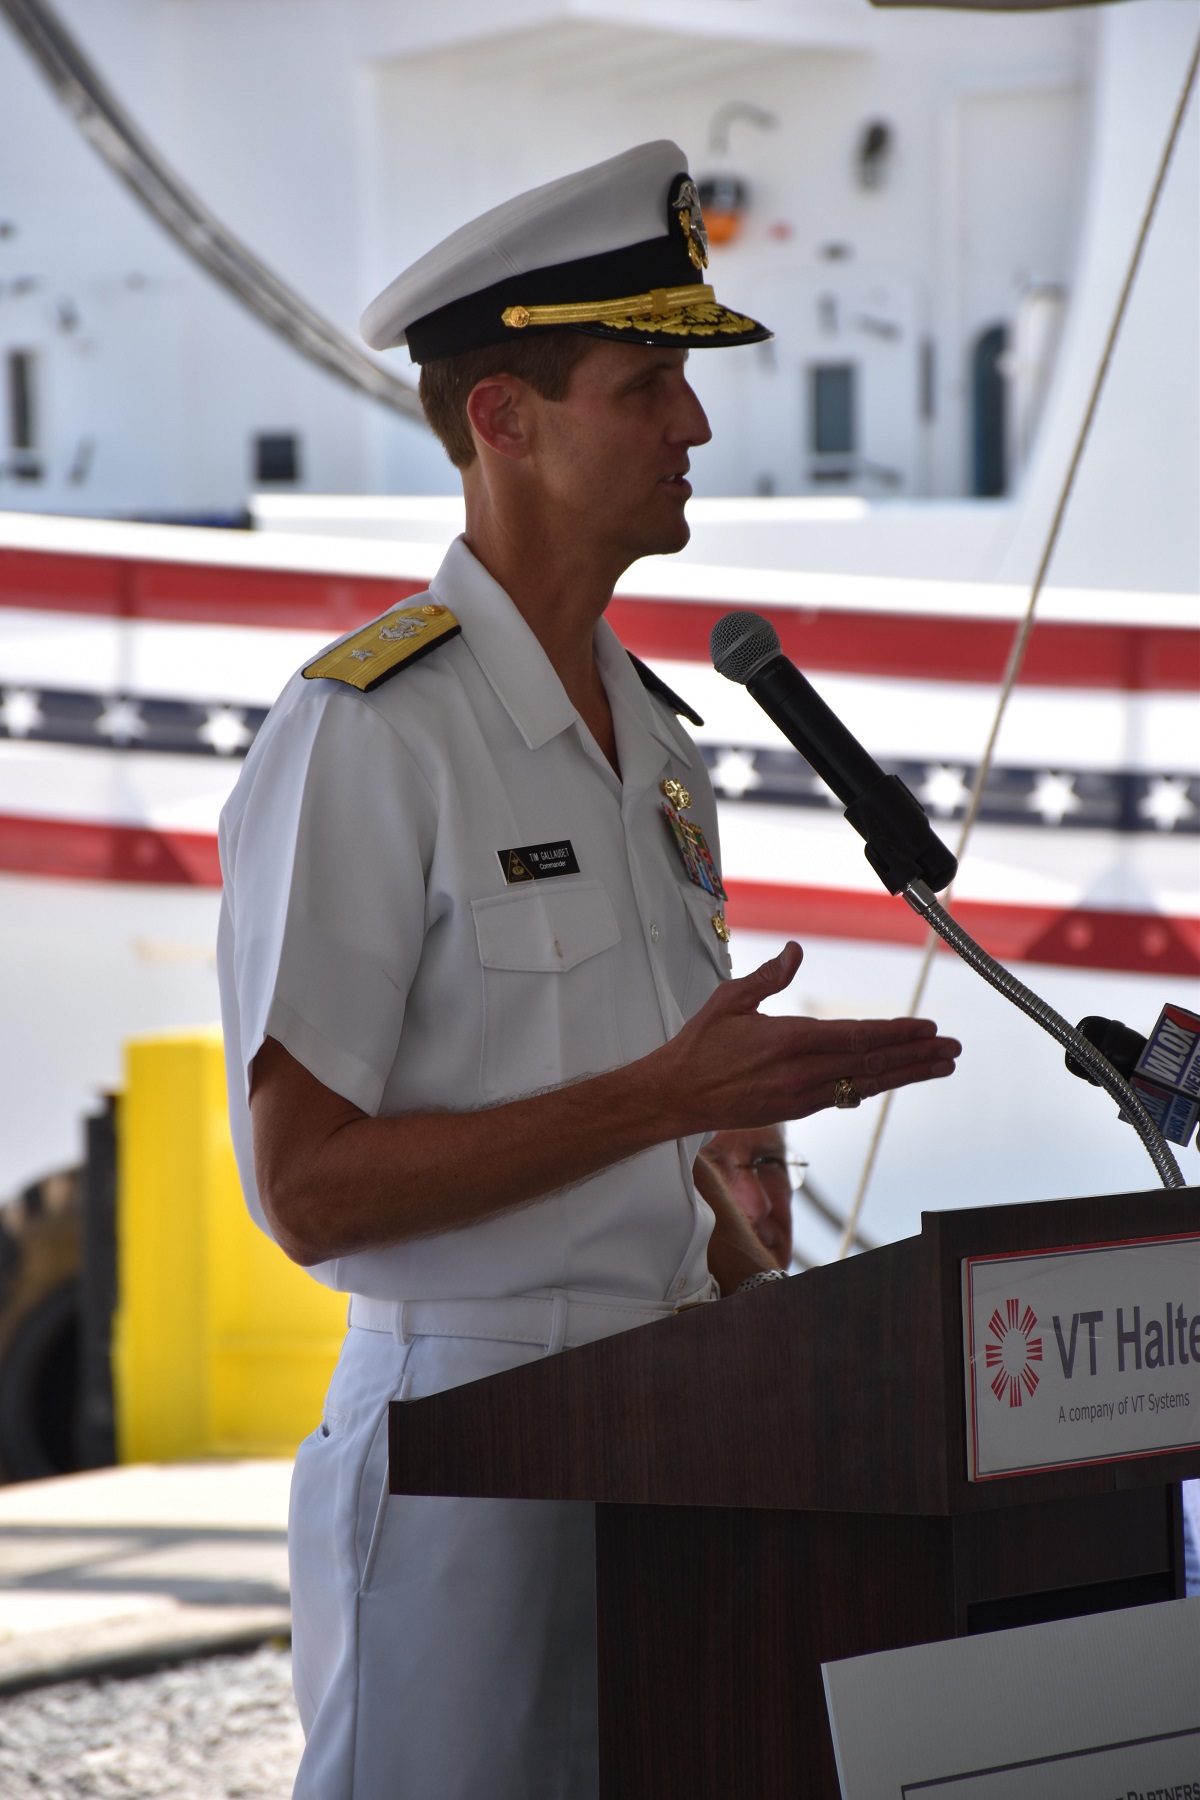 PASCAGOULA, Miss. (May 31, 2016) Rear Adm. Timothy Gallaudet, commander of the Naval Meteorology and Oceanography Command and Oceanographer and Navigator of the Navy, speaks at the Celebration of Partnership of USNS Maury (T-AGS 66), the Navy's newest oceanographic survey ship, at the VT Halter Marine shipyard. Maury, the last of the T-AGS 60 Class, will deploy to collect oceanographic data for use by the Navy. The Naval Oceanographic Office, an operational subordinate of the Naval Meteorology and Oceanography Command, will operate the ship.